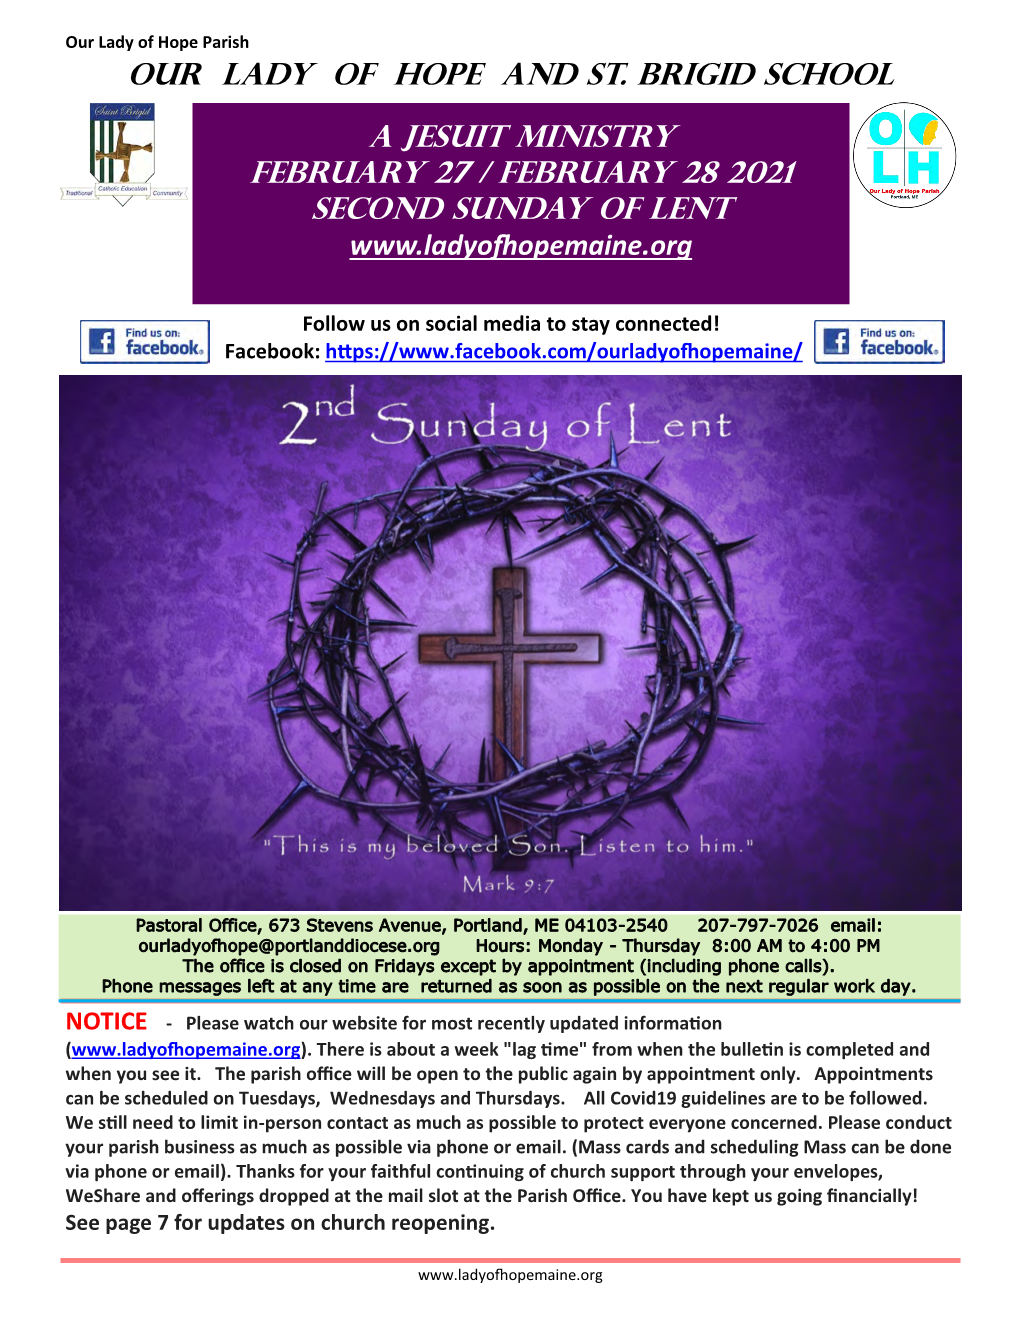 A Jesuit Ministry February 27 / February 28 2021 Second Sunday of Lent